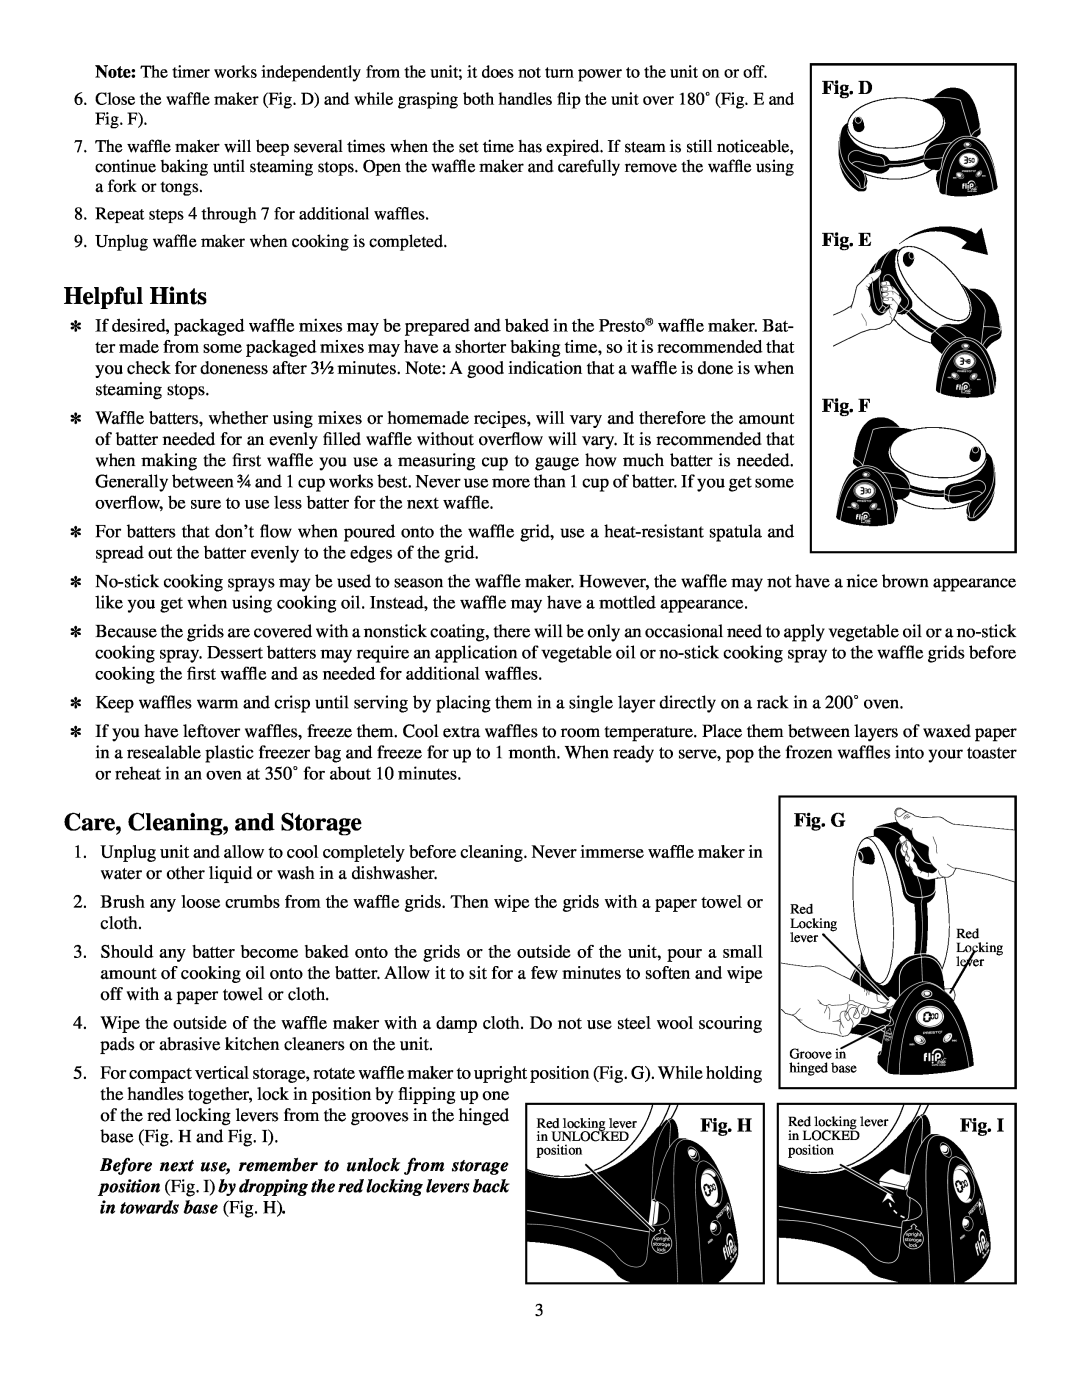 Presto FlipSide manual Helpful Hints, Care, Cleaning, and Storage, Fig. D Fig. E Fig. F, Fig. G, in towards base Fig. H 